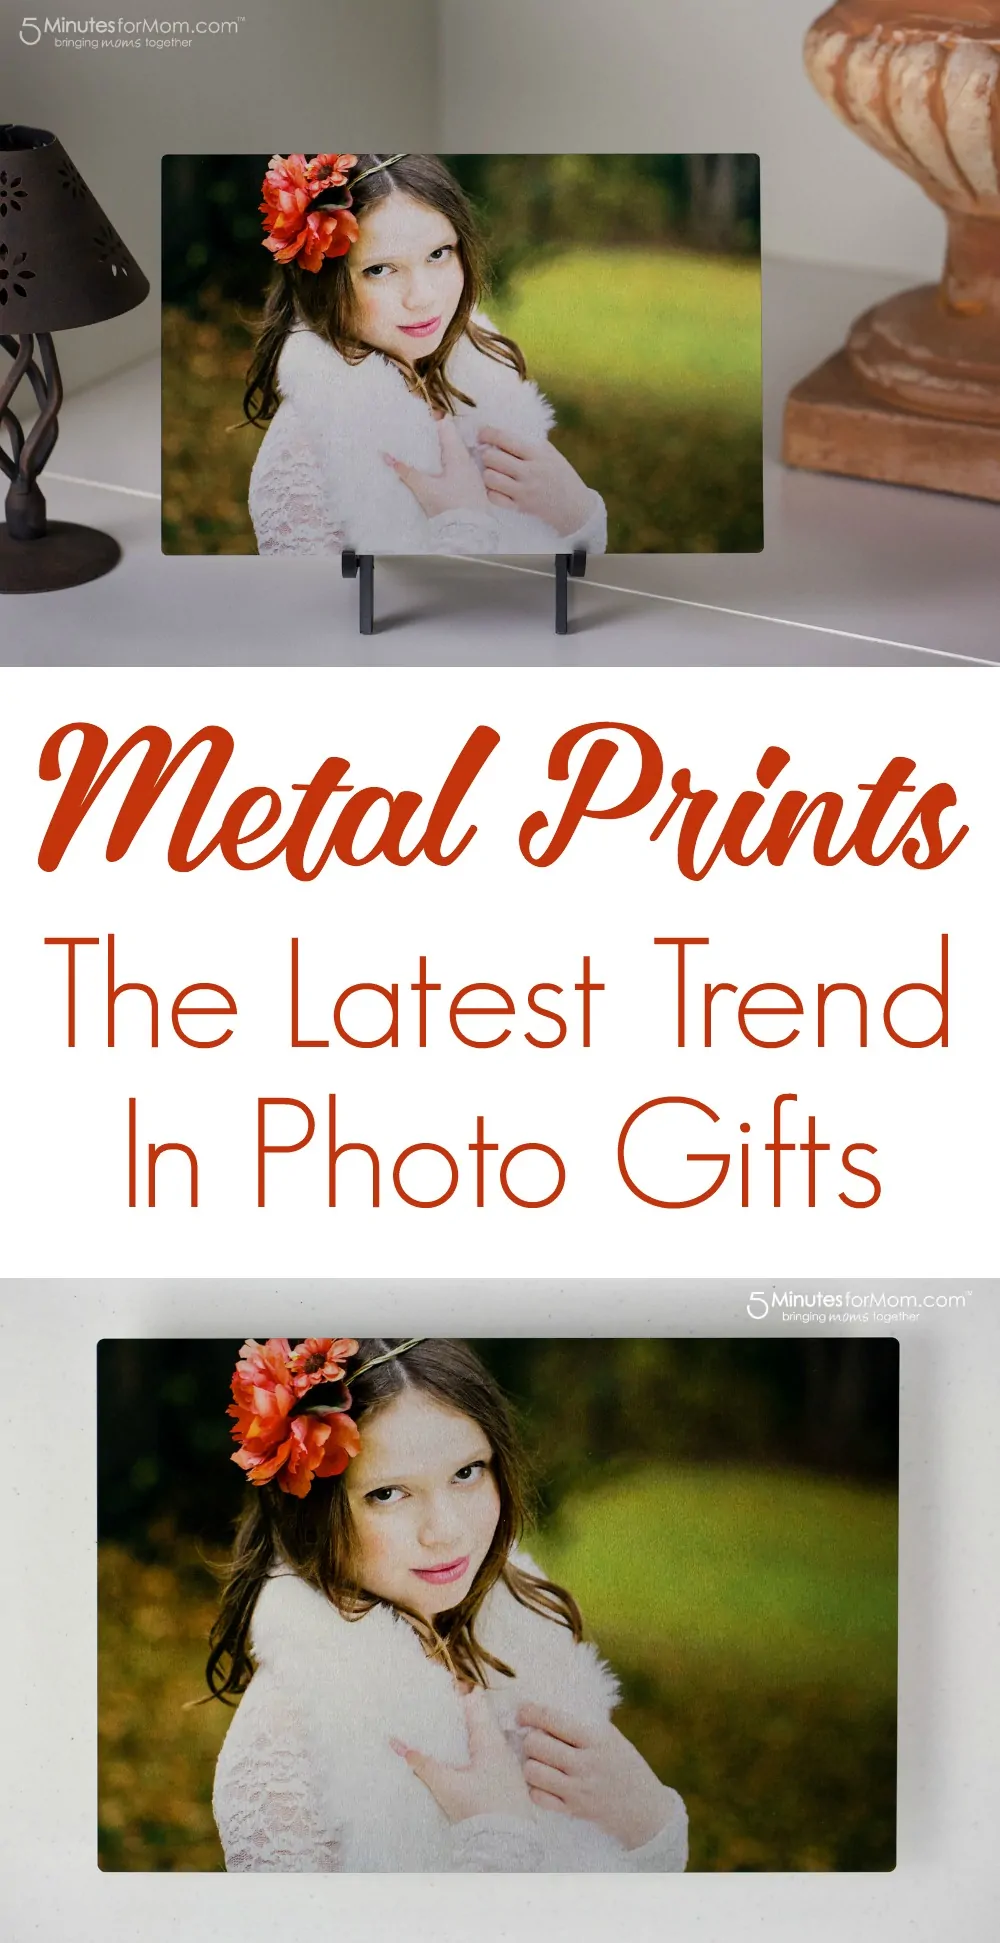 Metal Prints – The Latest Trend In Photo Gifts